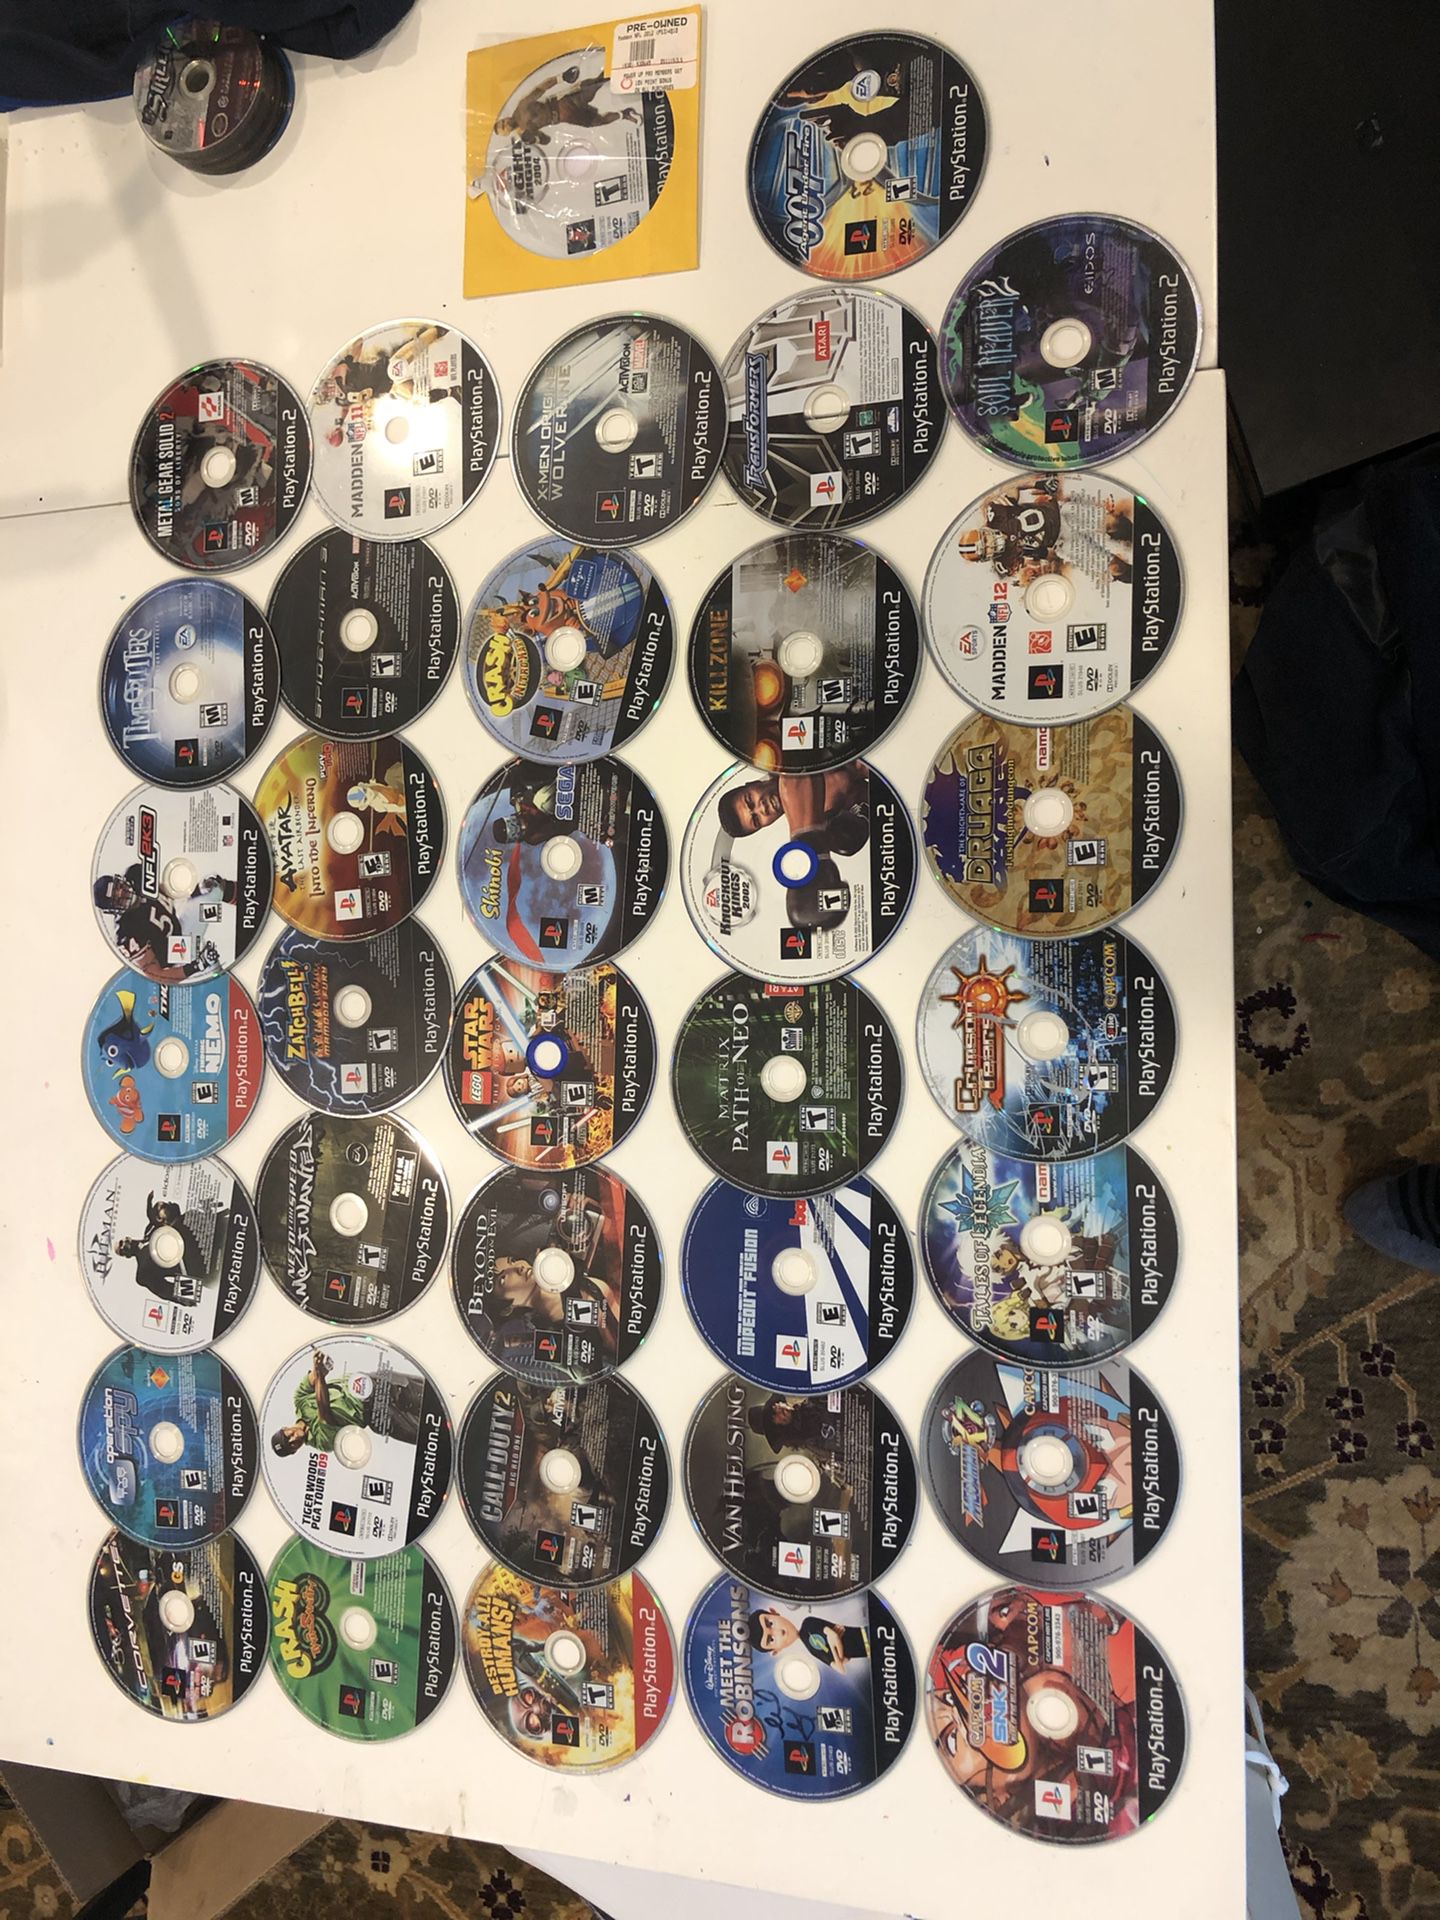 Wii ps2 GameCube ps1 360 ps3 loose discs 91 total AS IS SCRATCHED